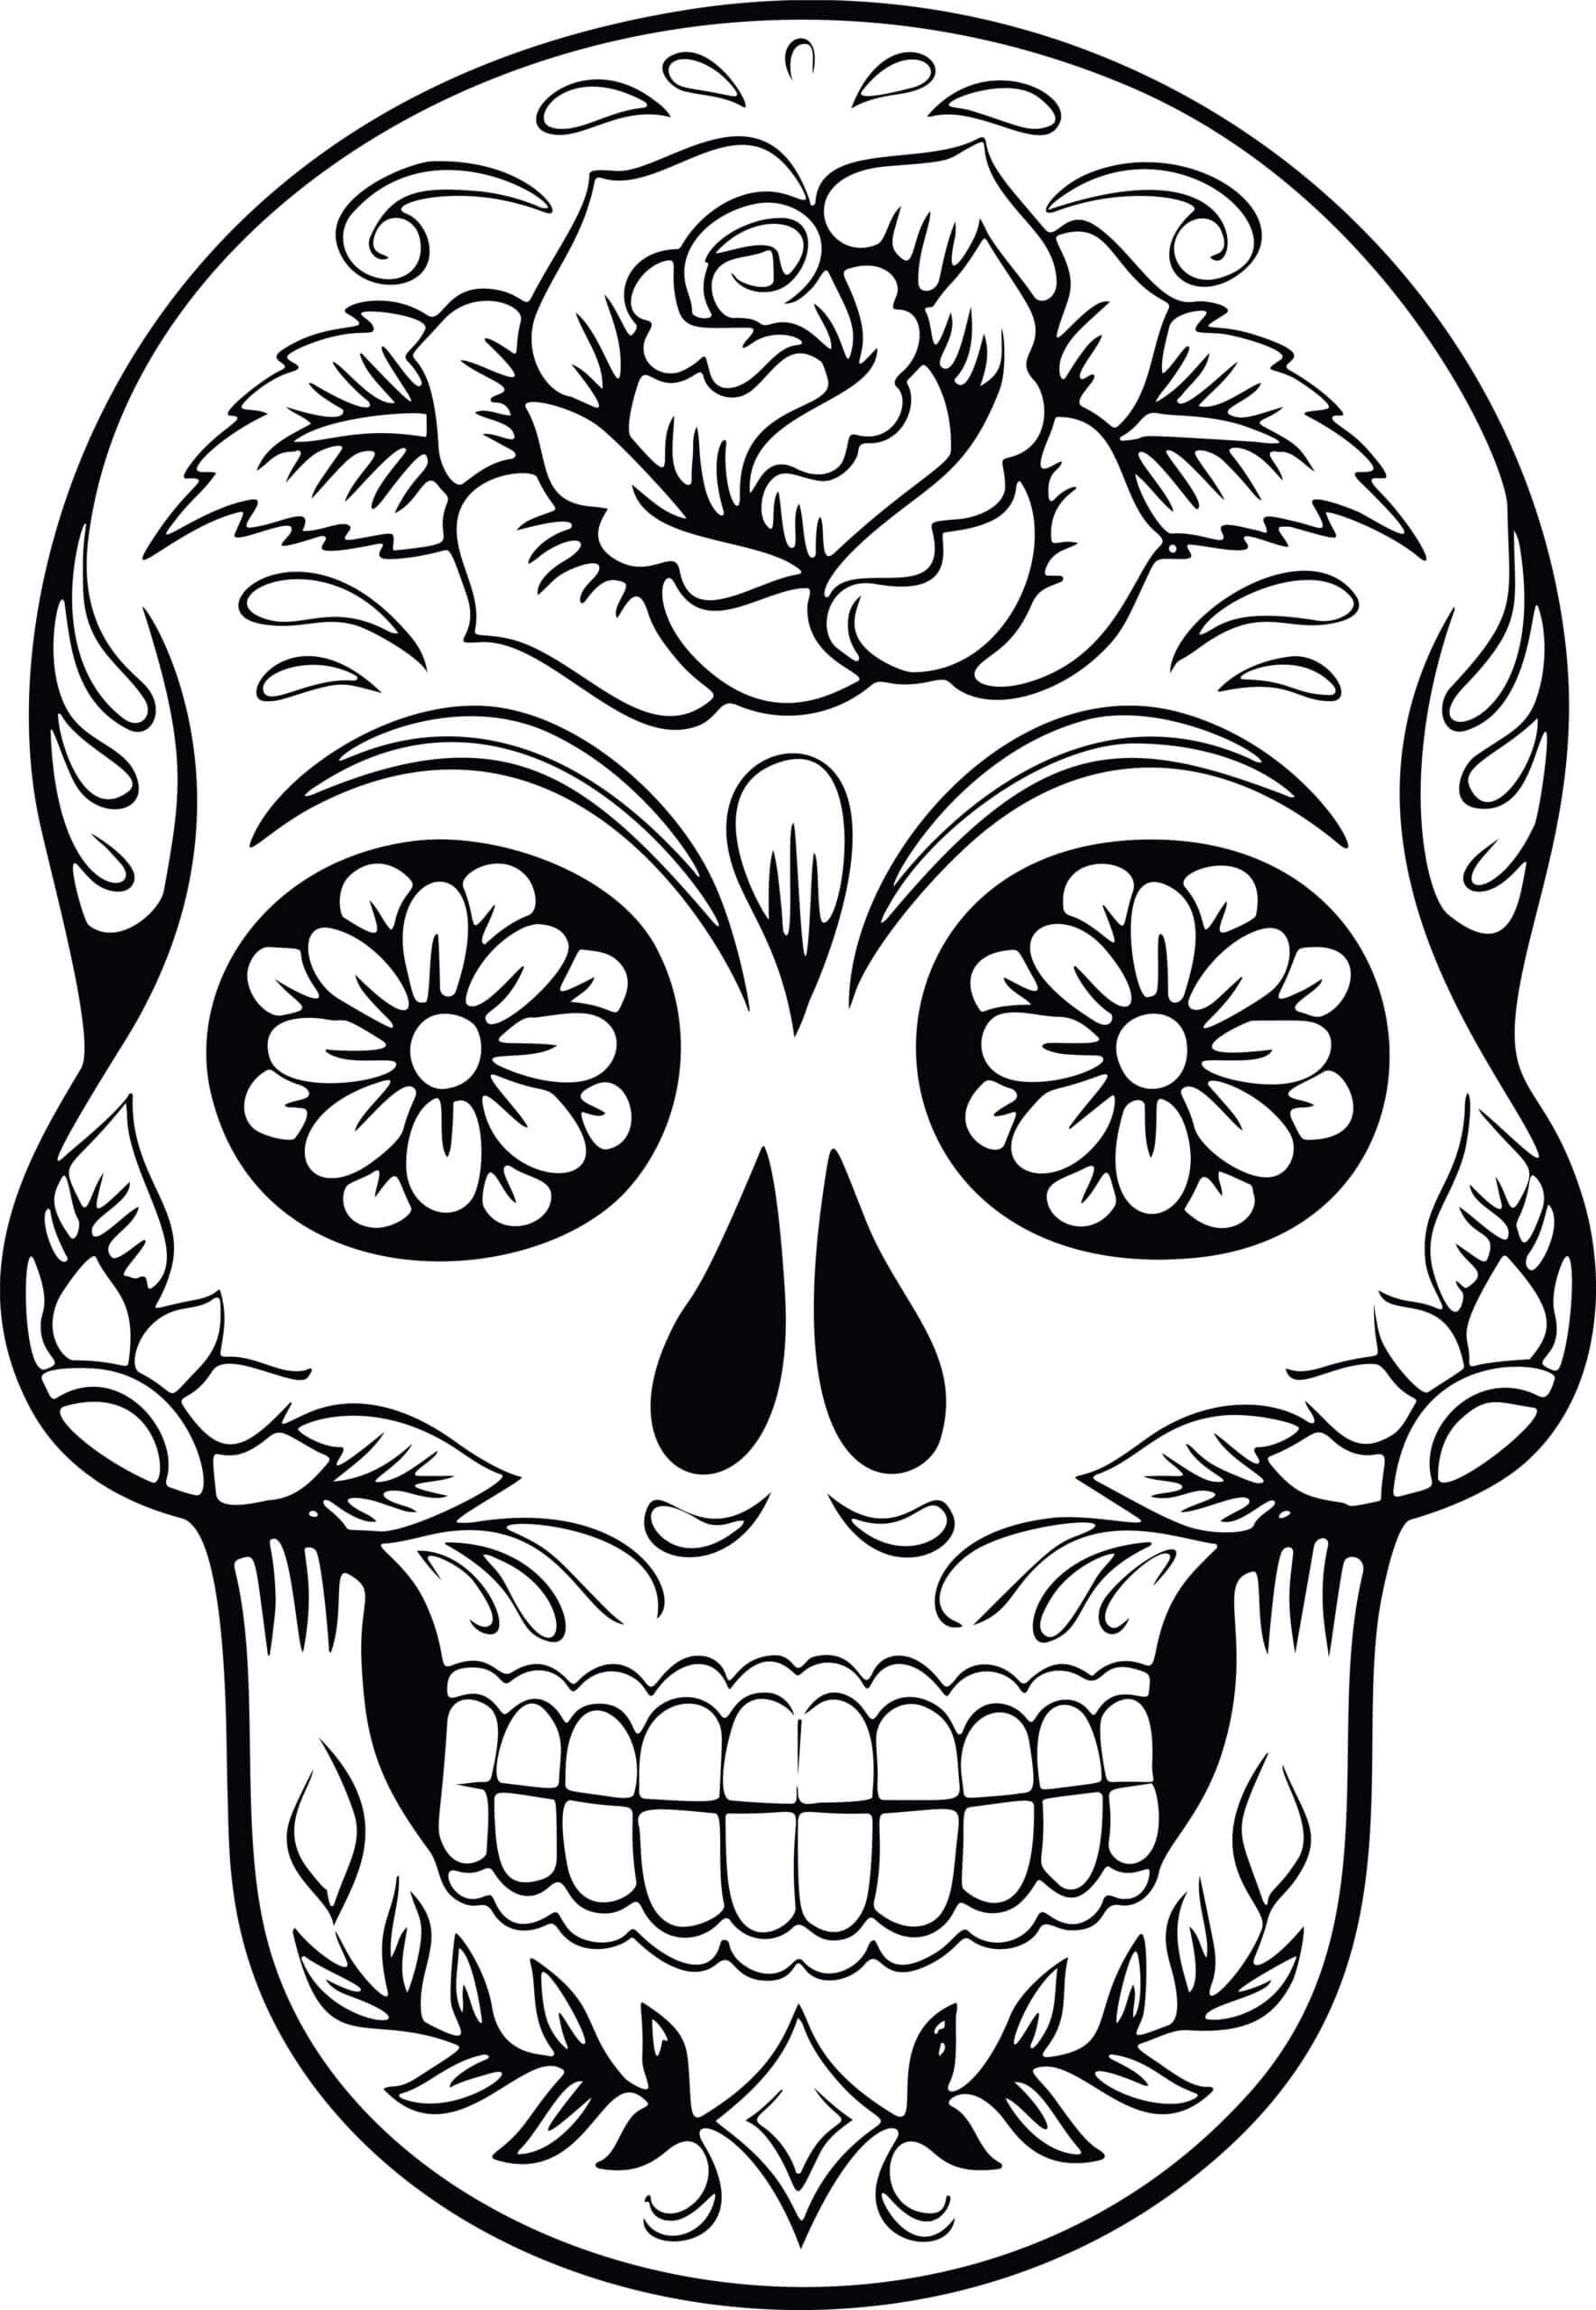 Best Coloring : Free Skull Anatomy Pages Muscular System For Blank Sugar Skull Template